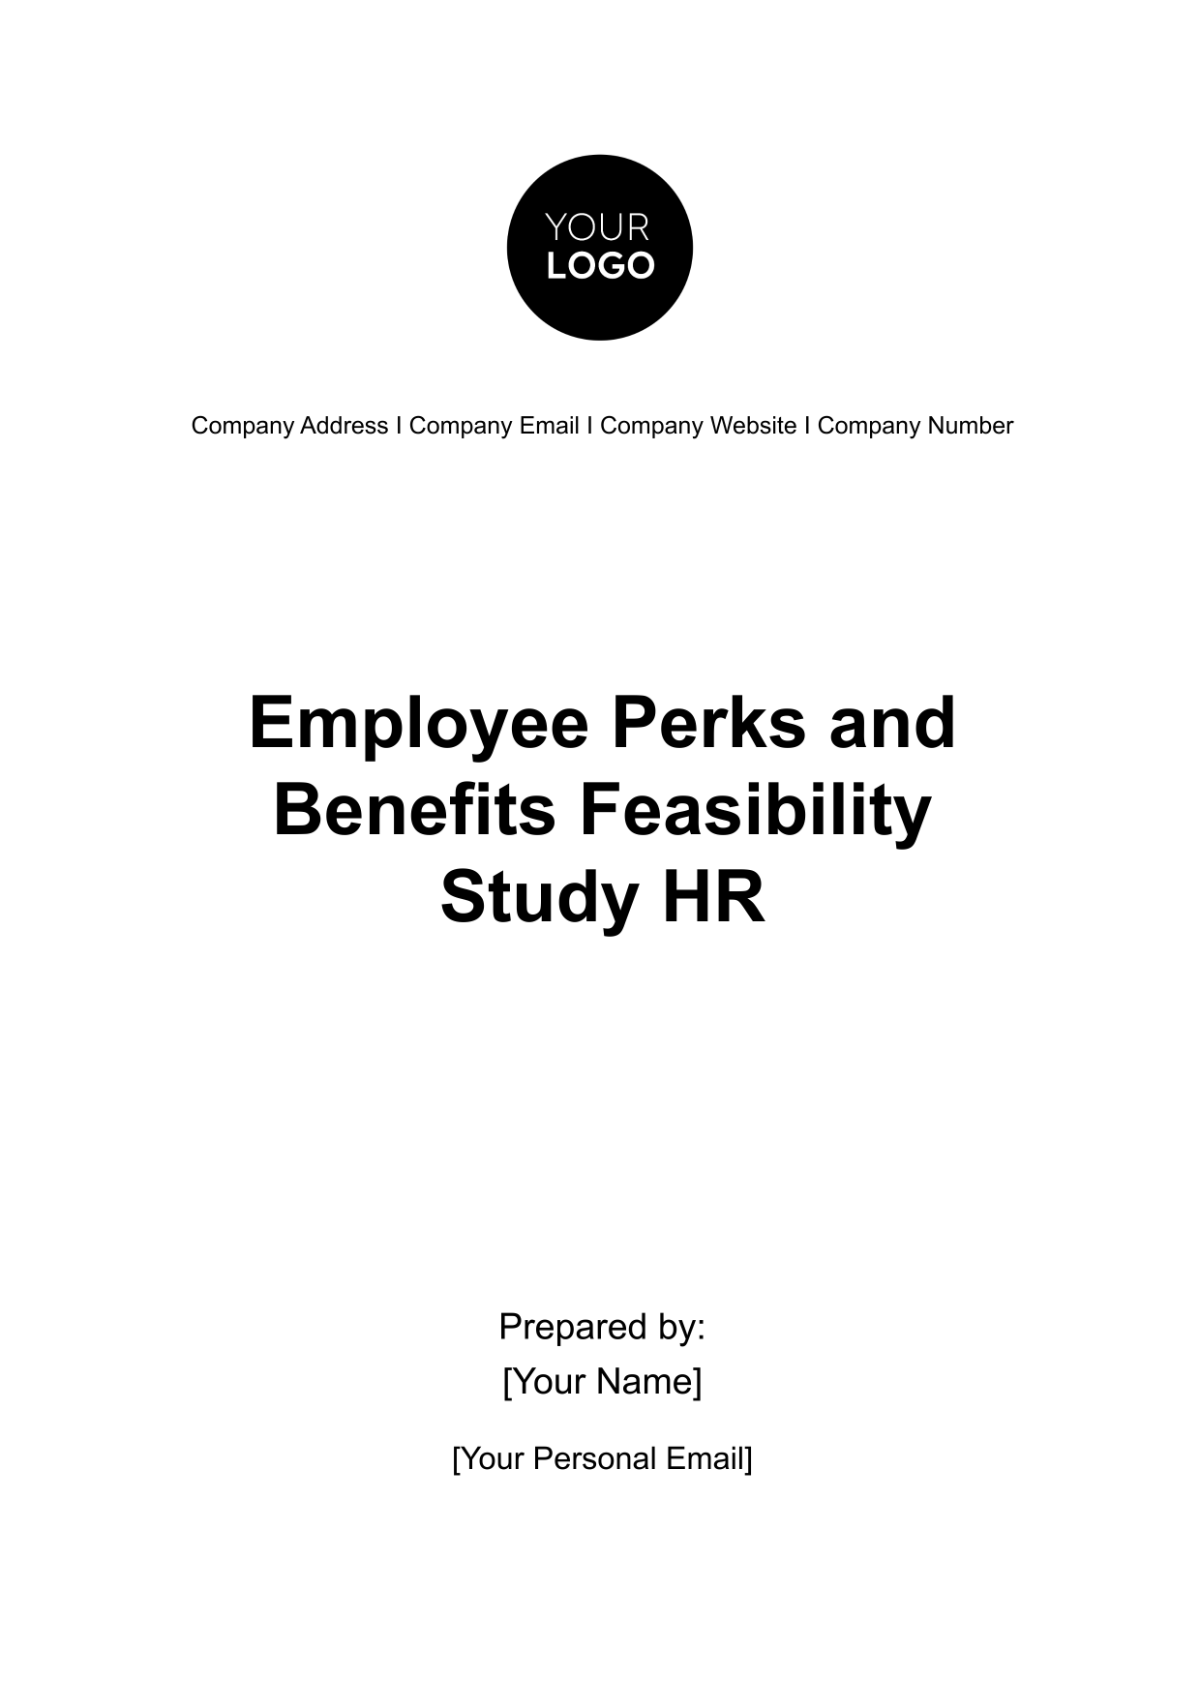 Free Employee Perks and Benefits Feasibility Study HR Template